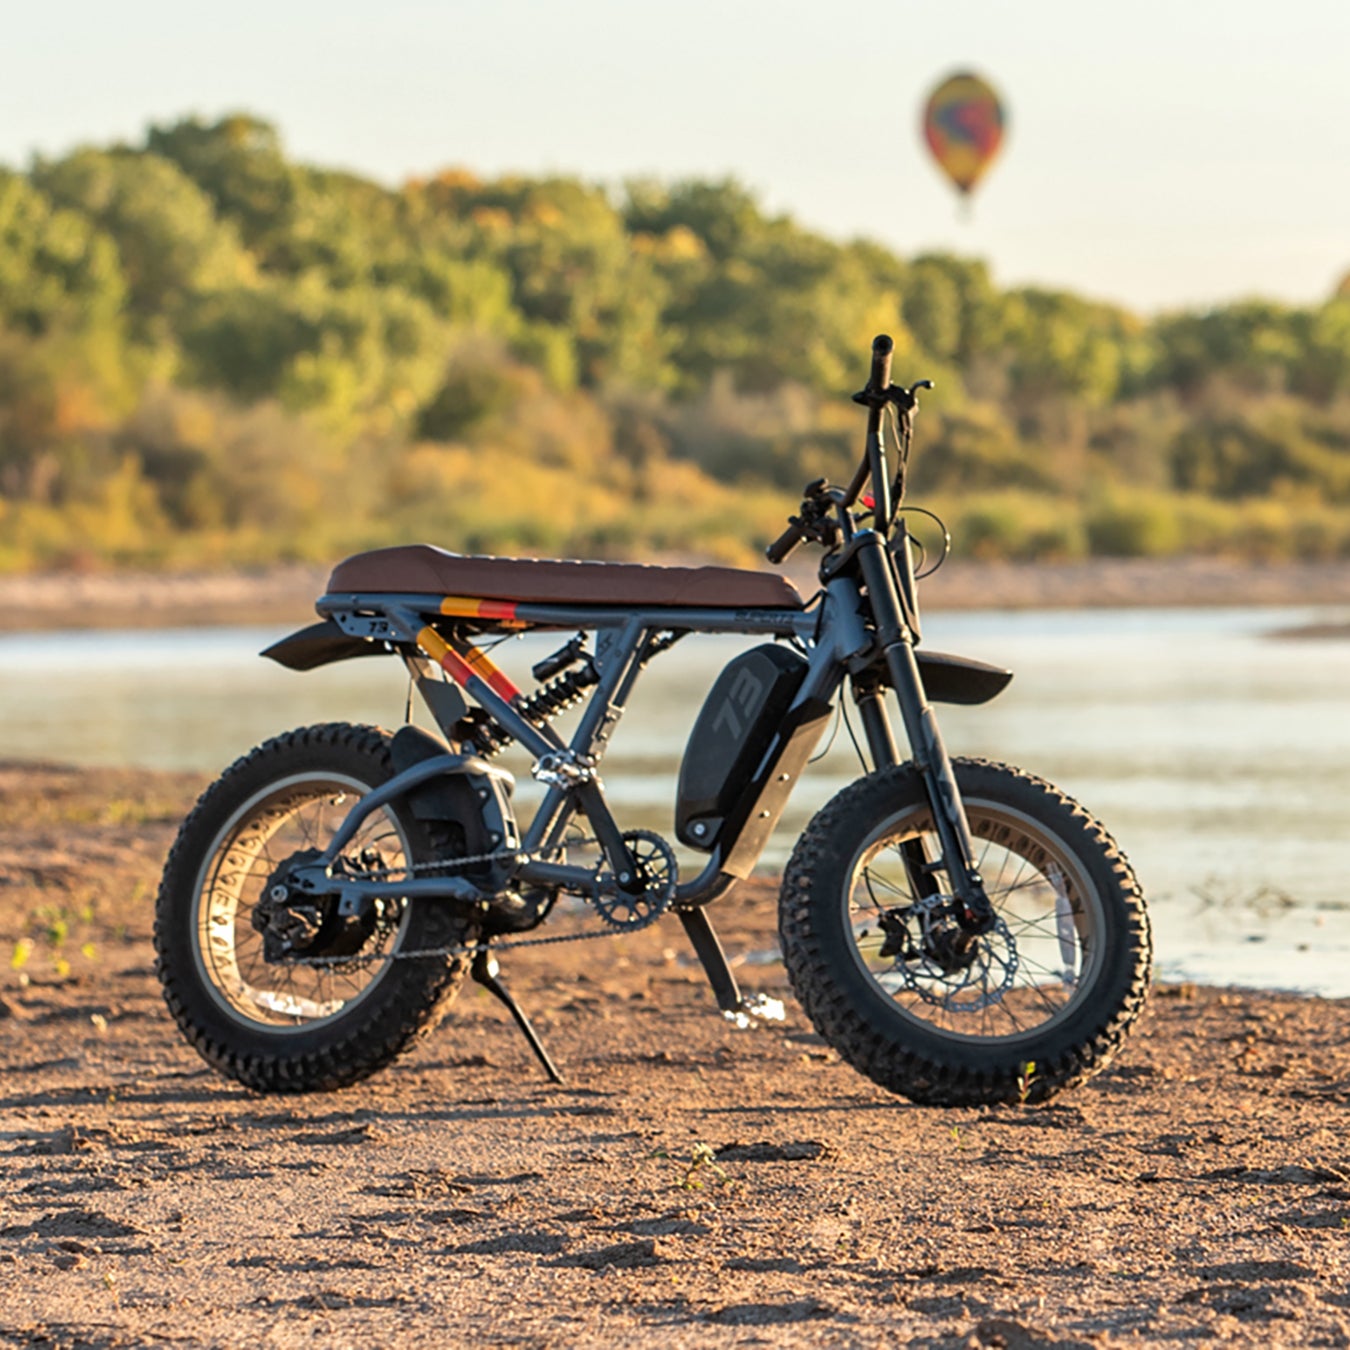 Adventure E-Bikes Fill a Niche You Didn't Even Know Existed